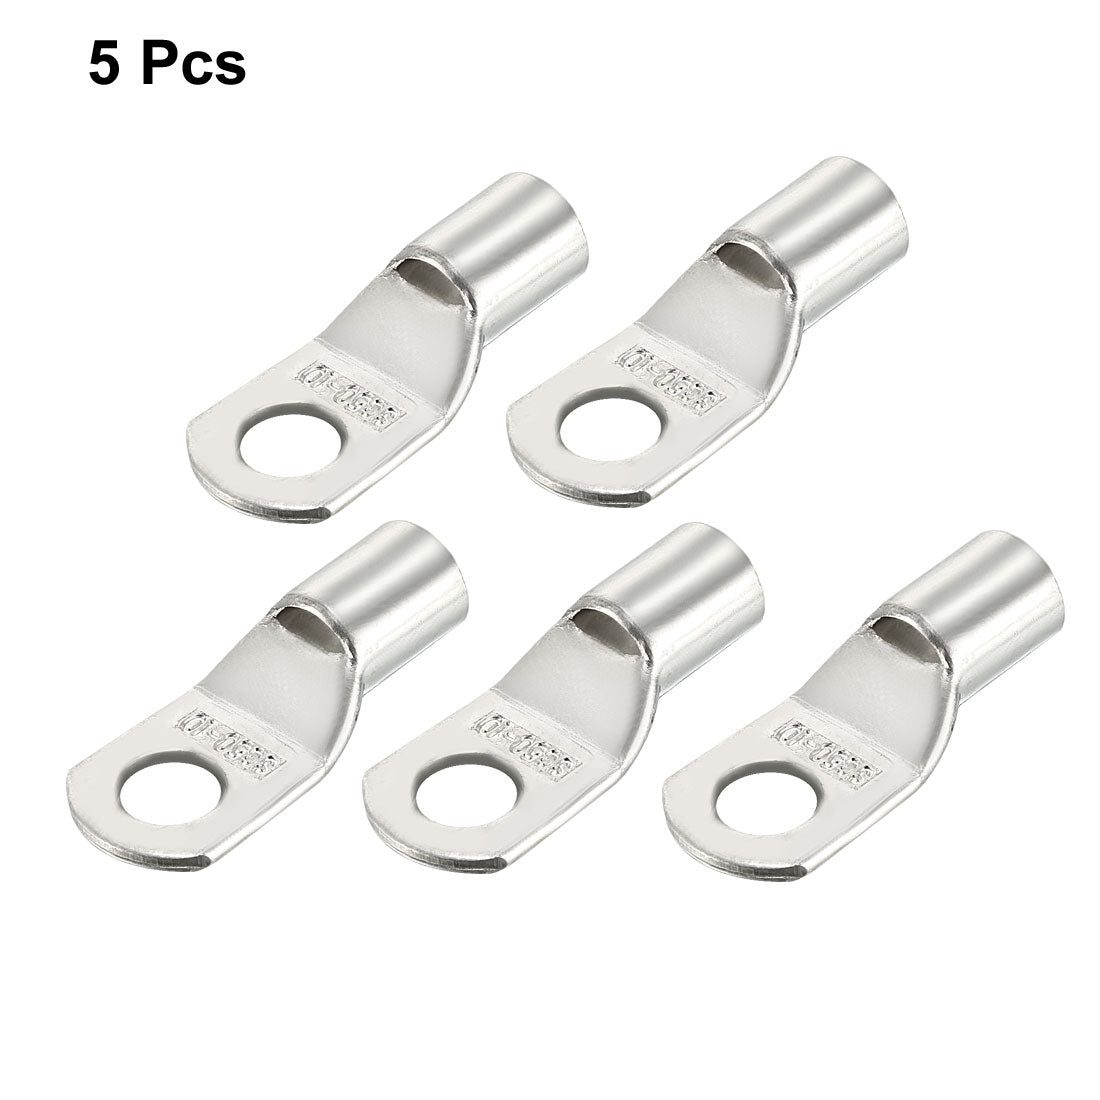 uxcell Uxcell 5Pcs SC50-10 Non-Insulated U-Type Copper Crimp Terminals 10mm Wire Connector Silver Tone